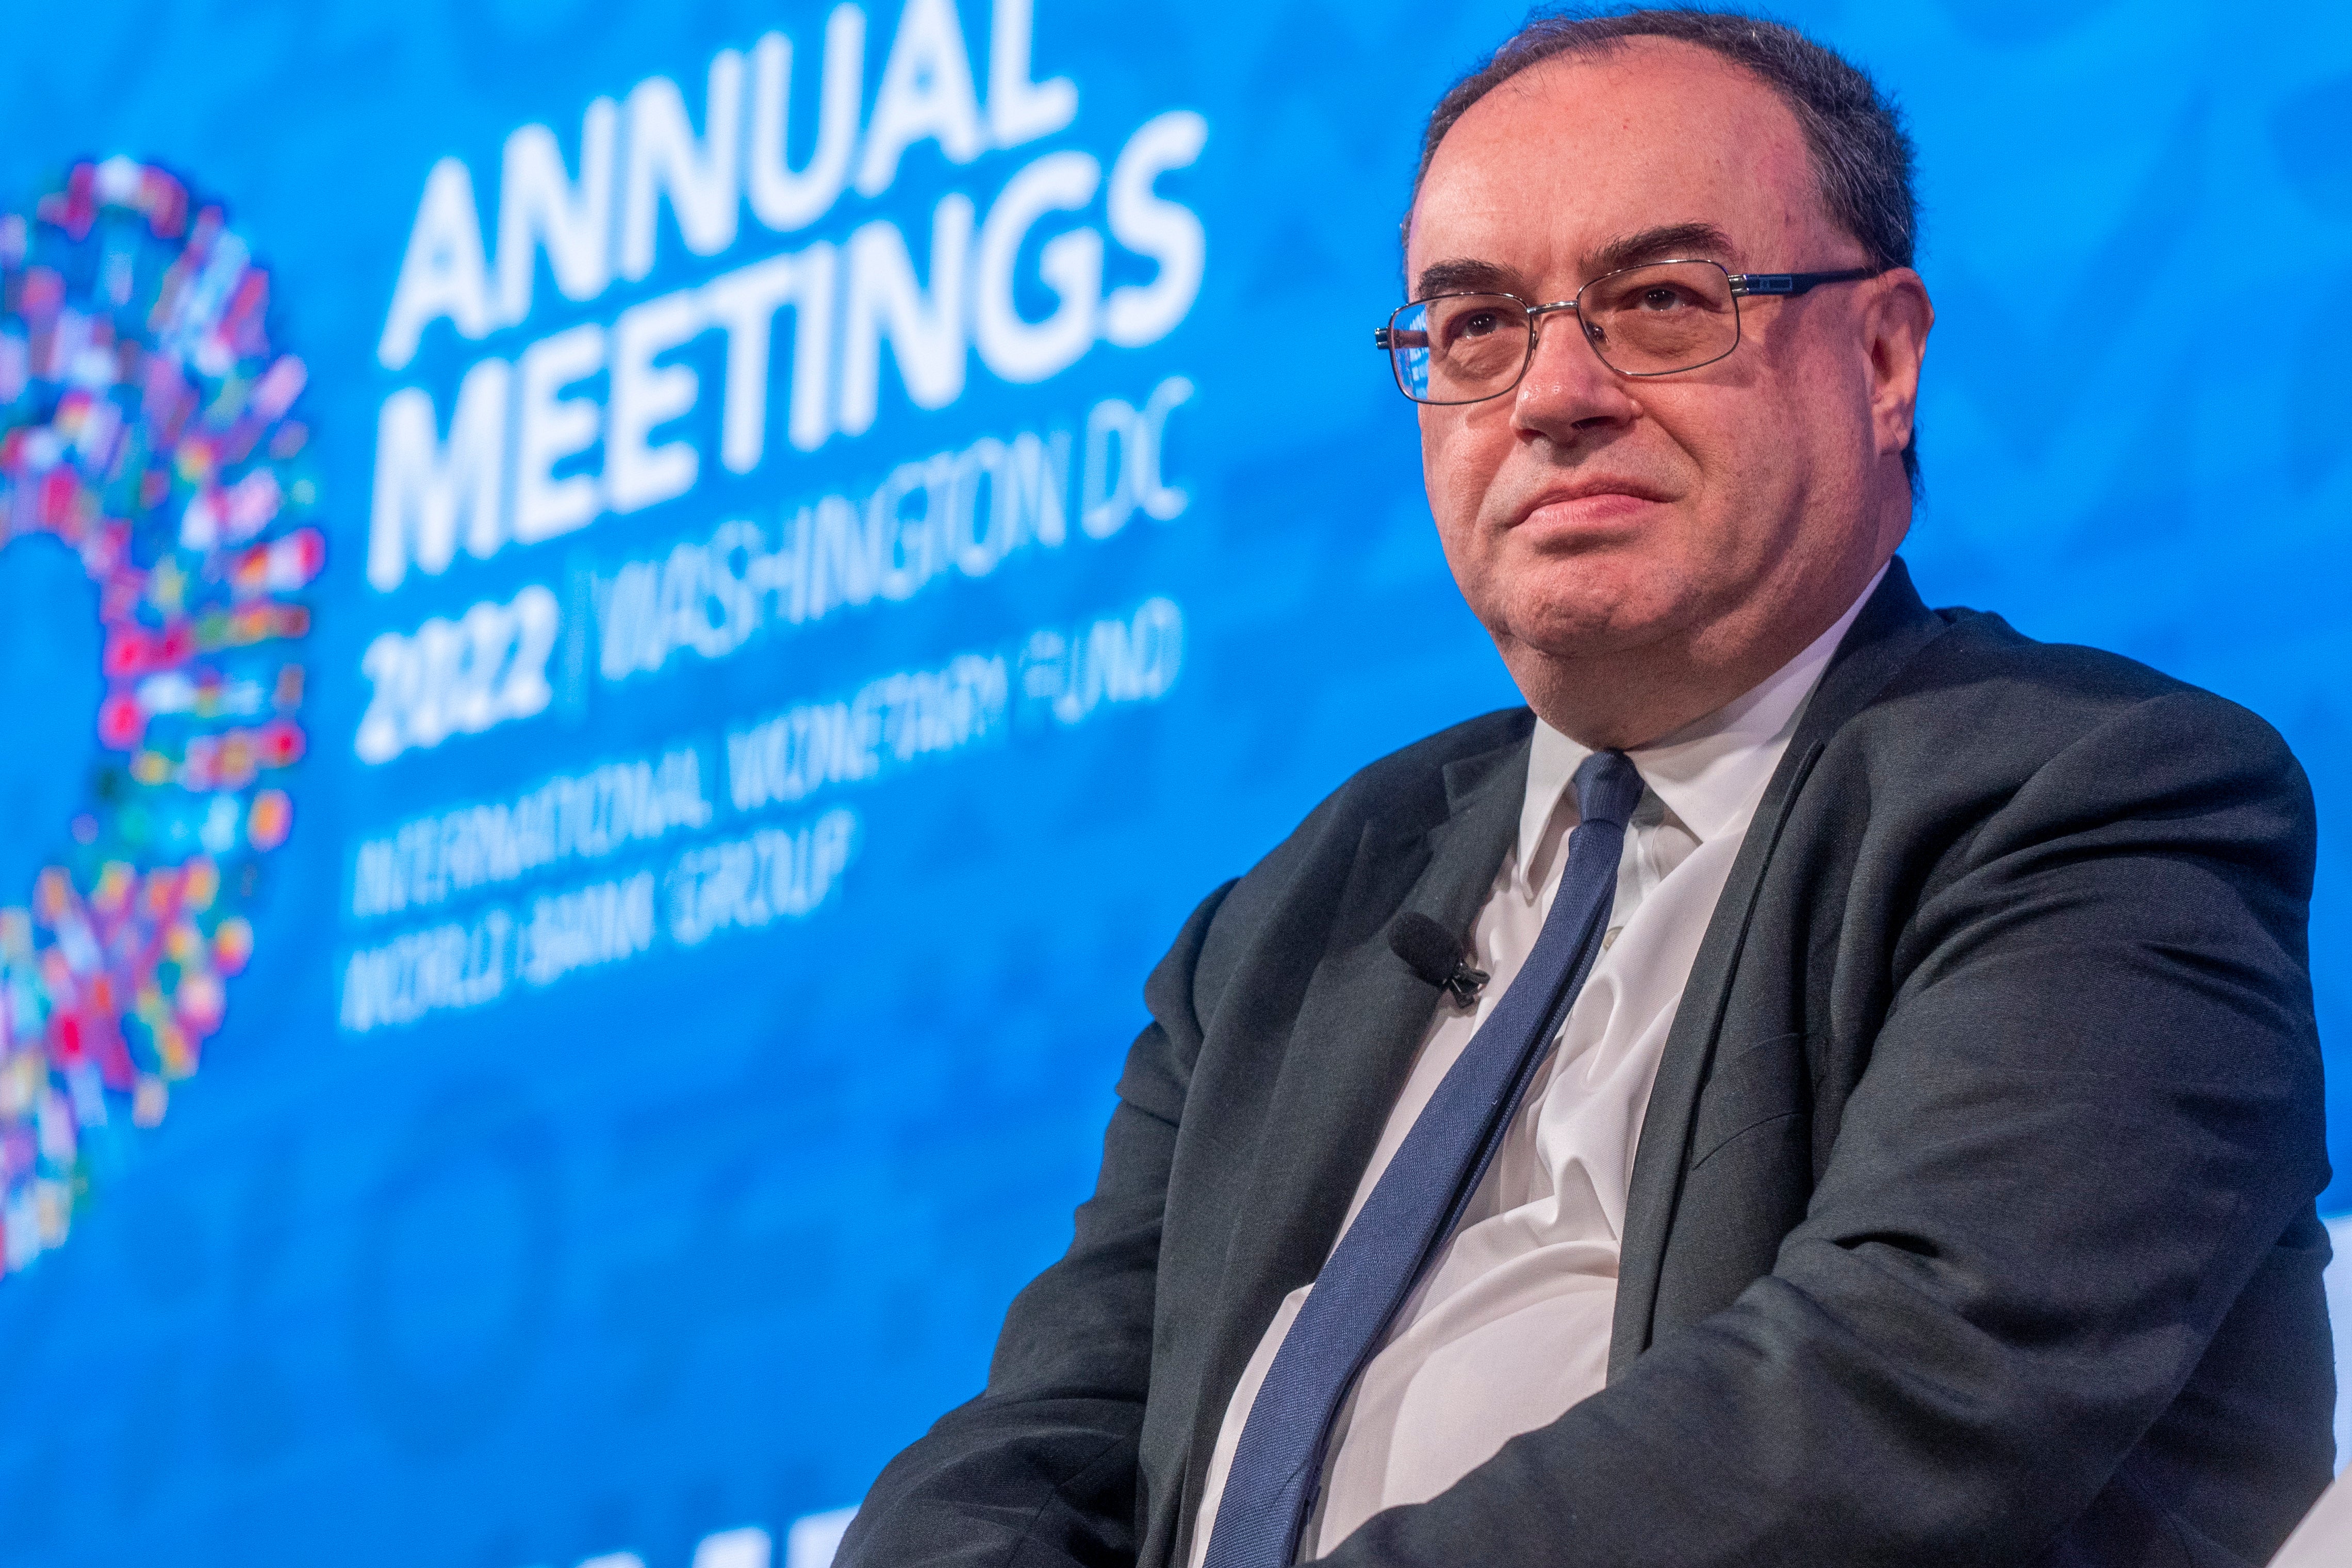 Andrew Bailey warned in October that a ‘stronger response’ may be needed to inflationary pressures